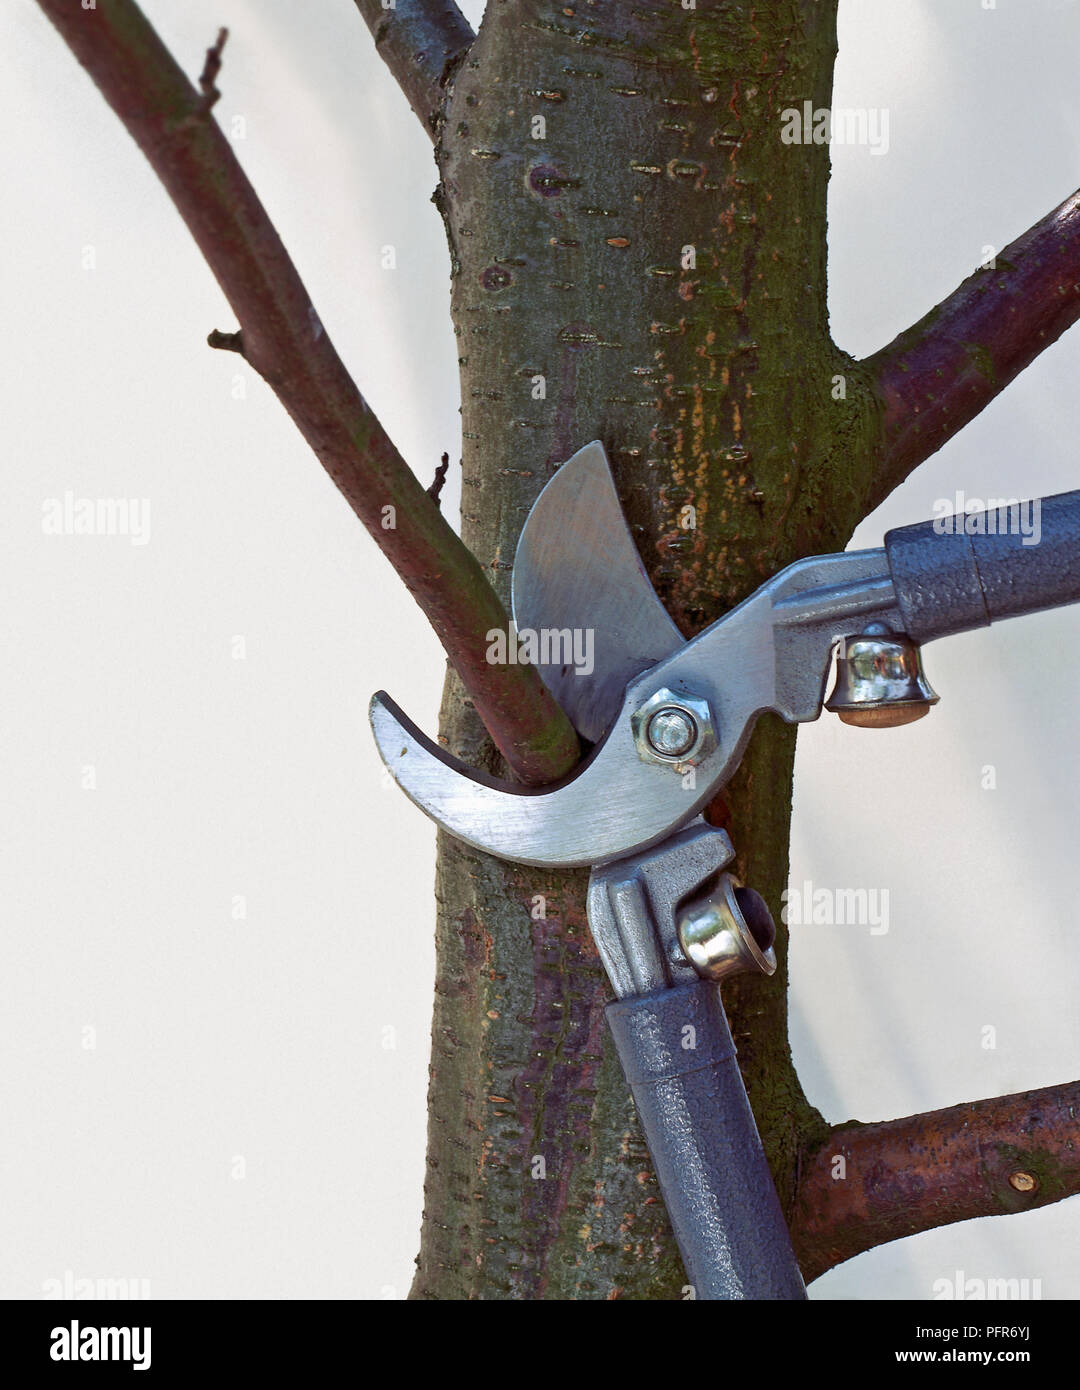 Preparing to remove thin branch from tree trunk using loppers Stock Photo